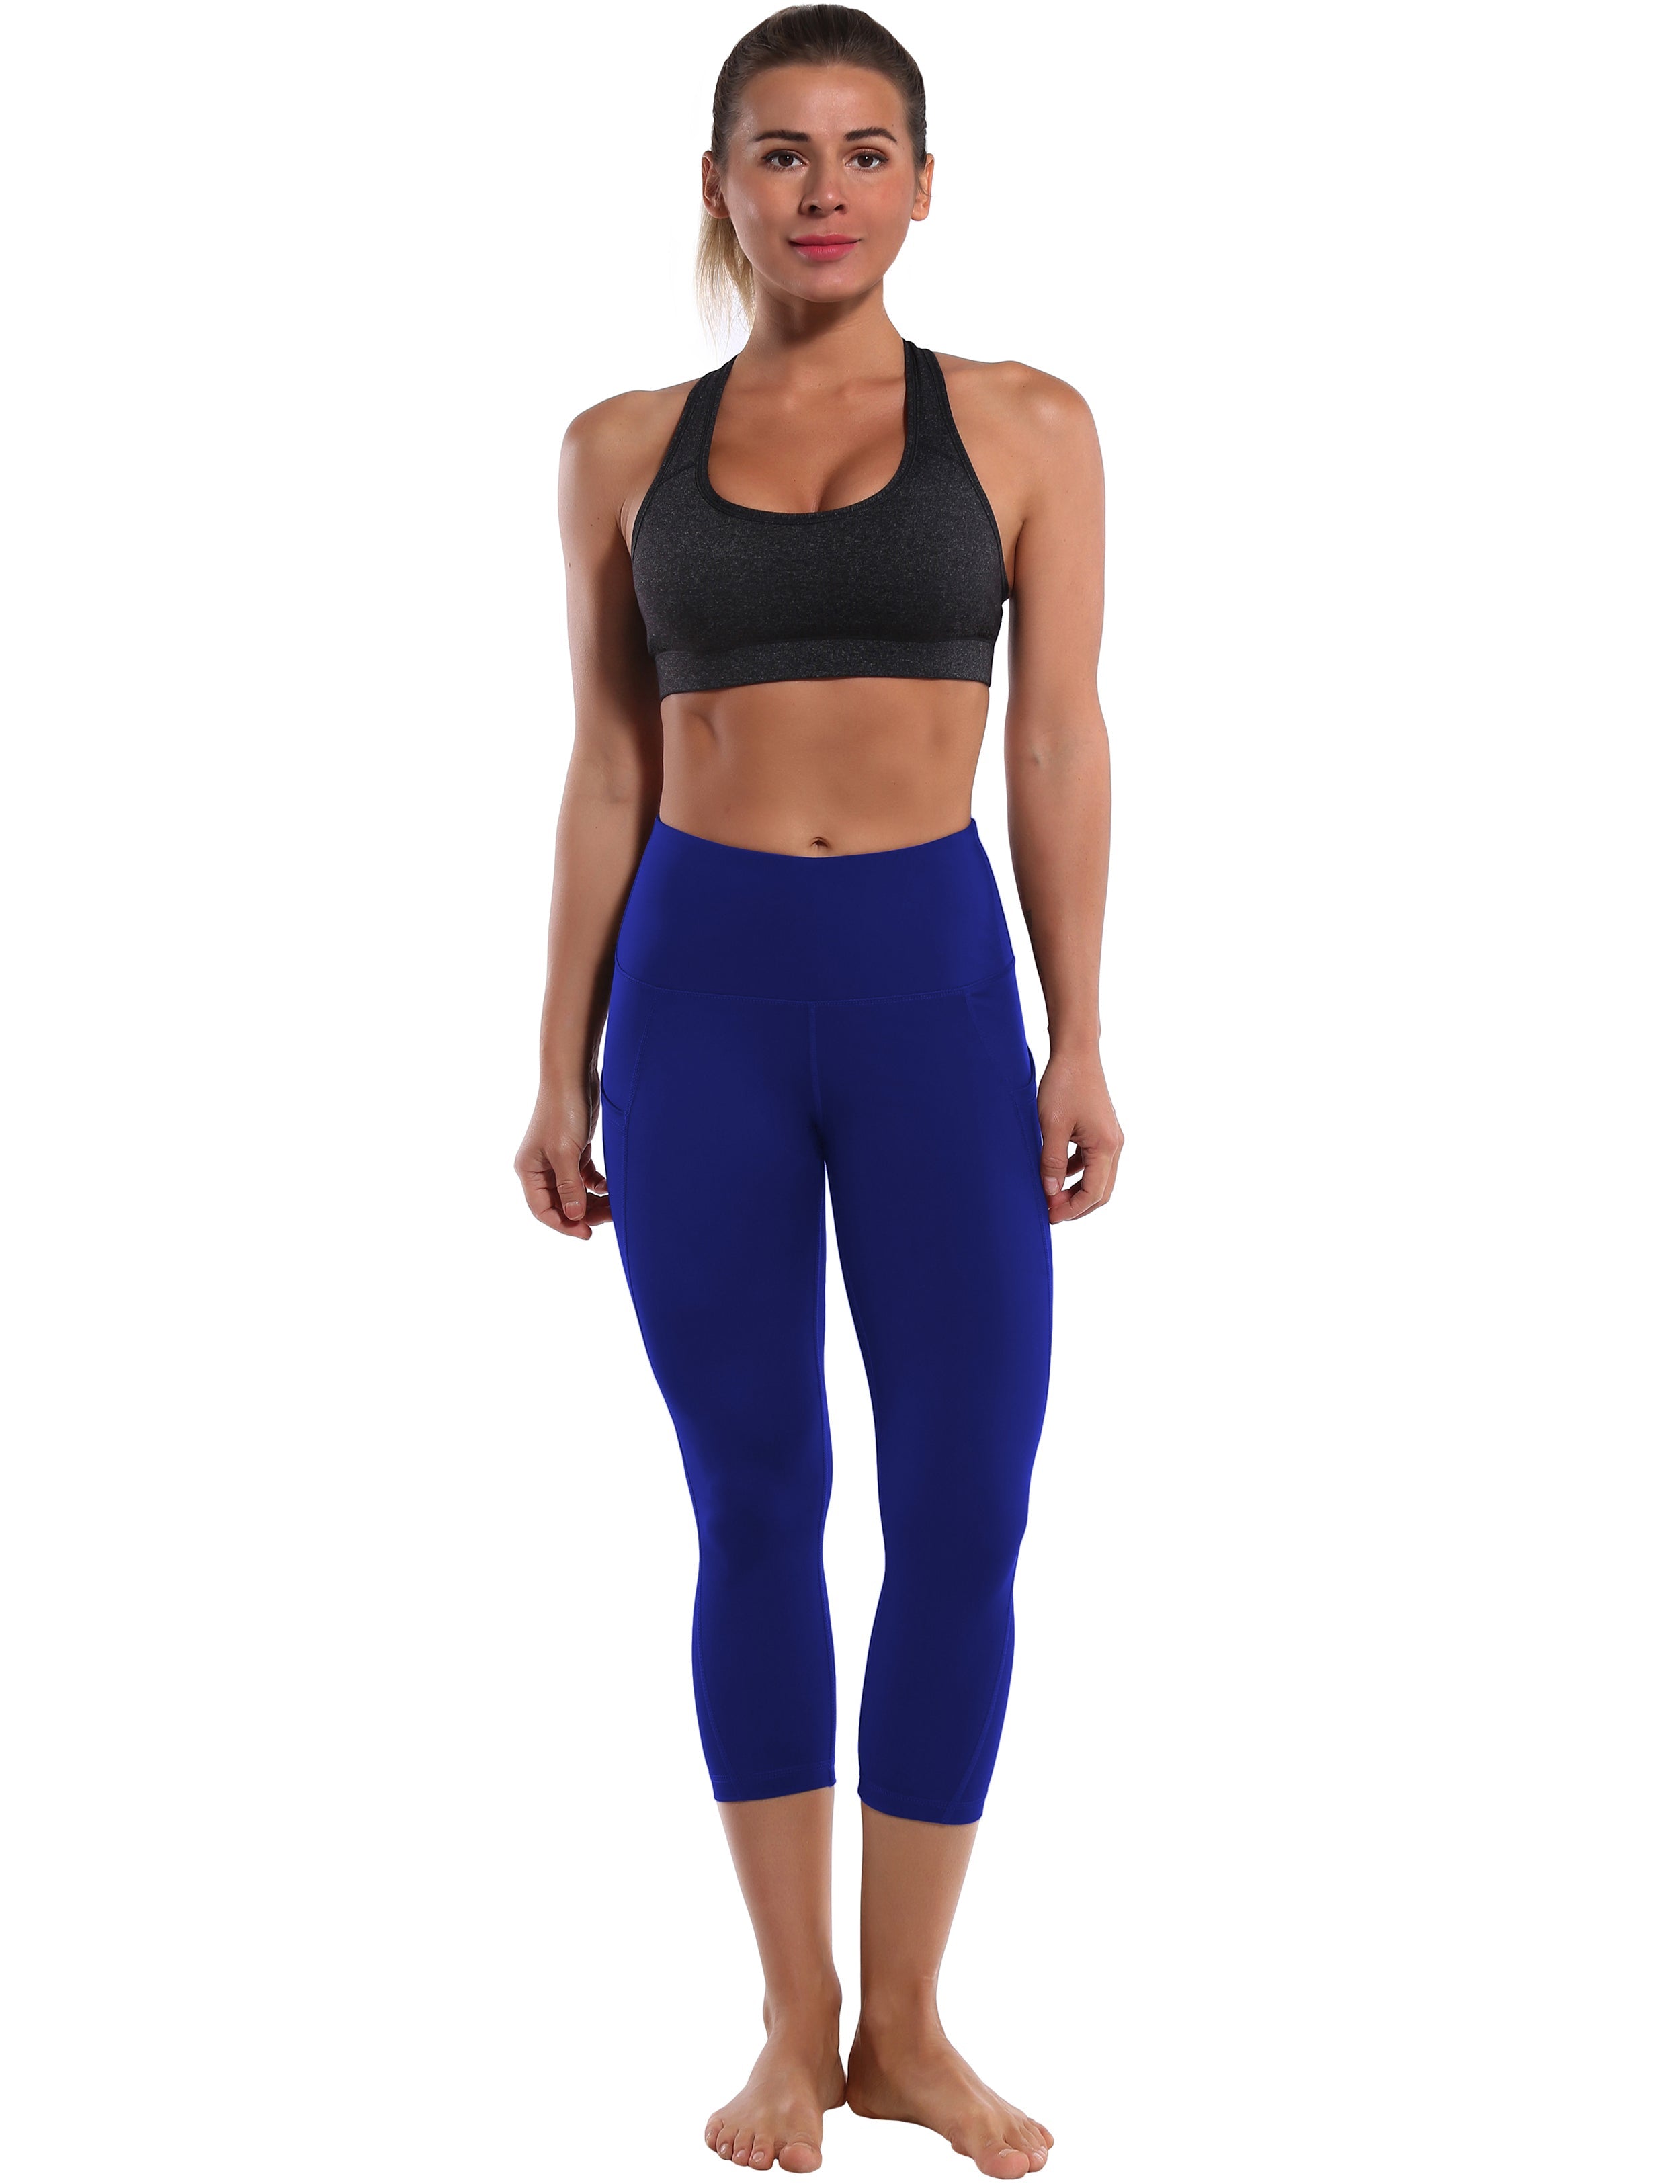 19" High Waist Side Pockets Capris navy 75%Nylon/25%Spandex Fabric doesn't attract lint easily 4-way stretch No see-through Moisture-wicking Tummy control Inner pocket